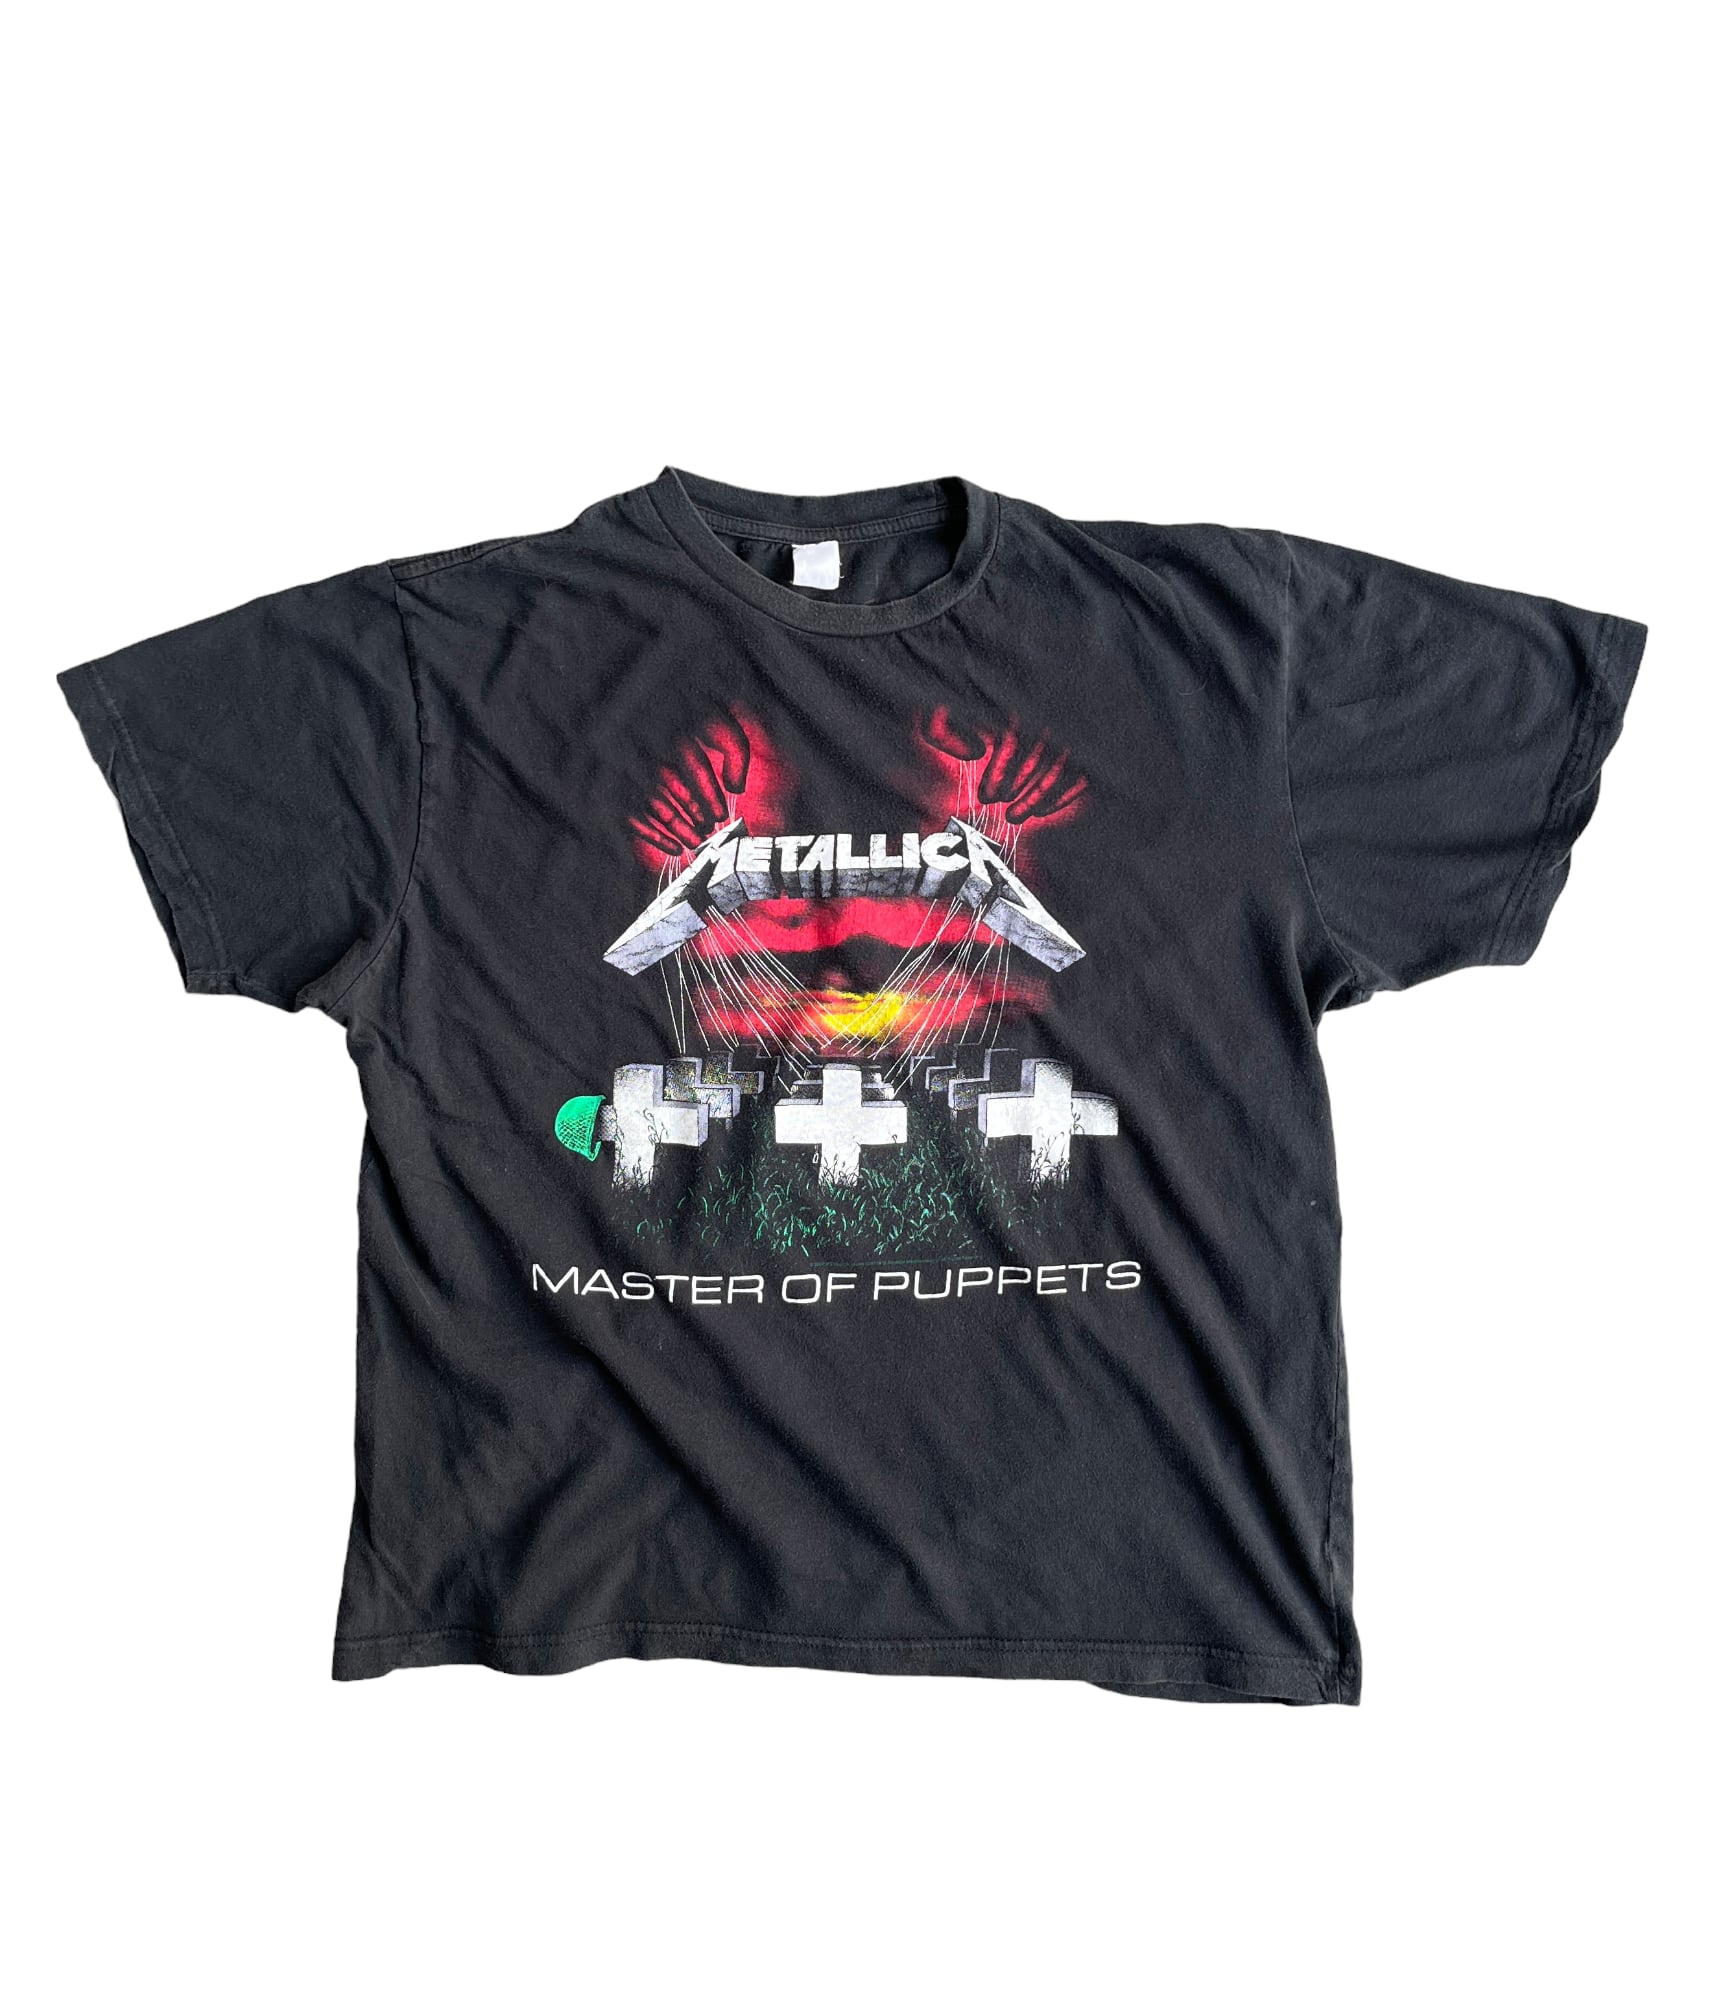 Vintage 00s Rock band T-shirts -METALLICA- | BEGGARS BANQUET公式通販サイト  古着・ヴィンテージ